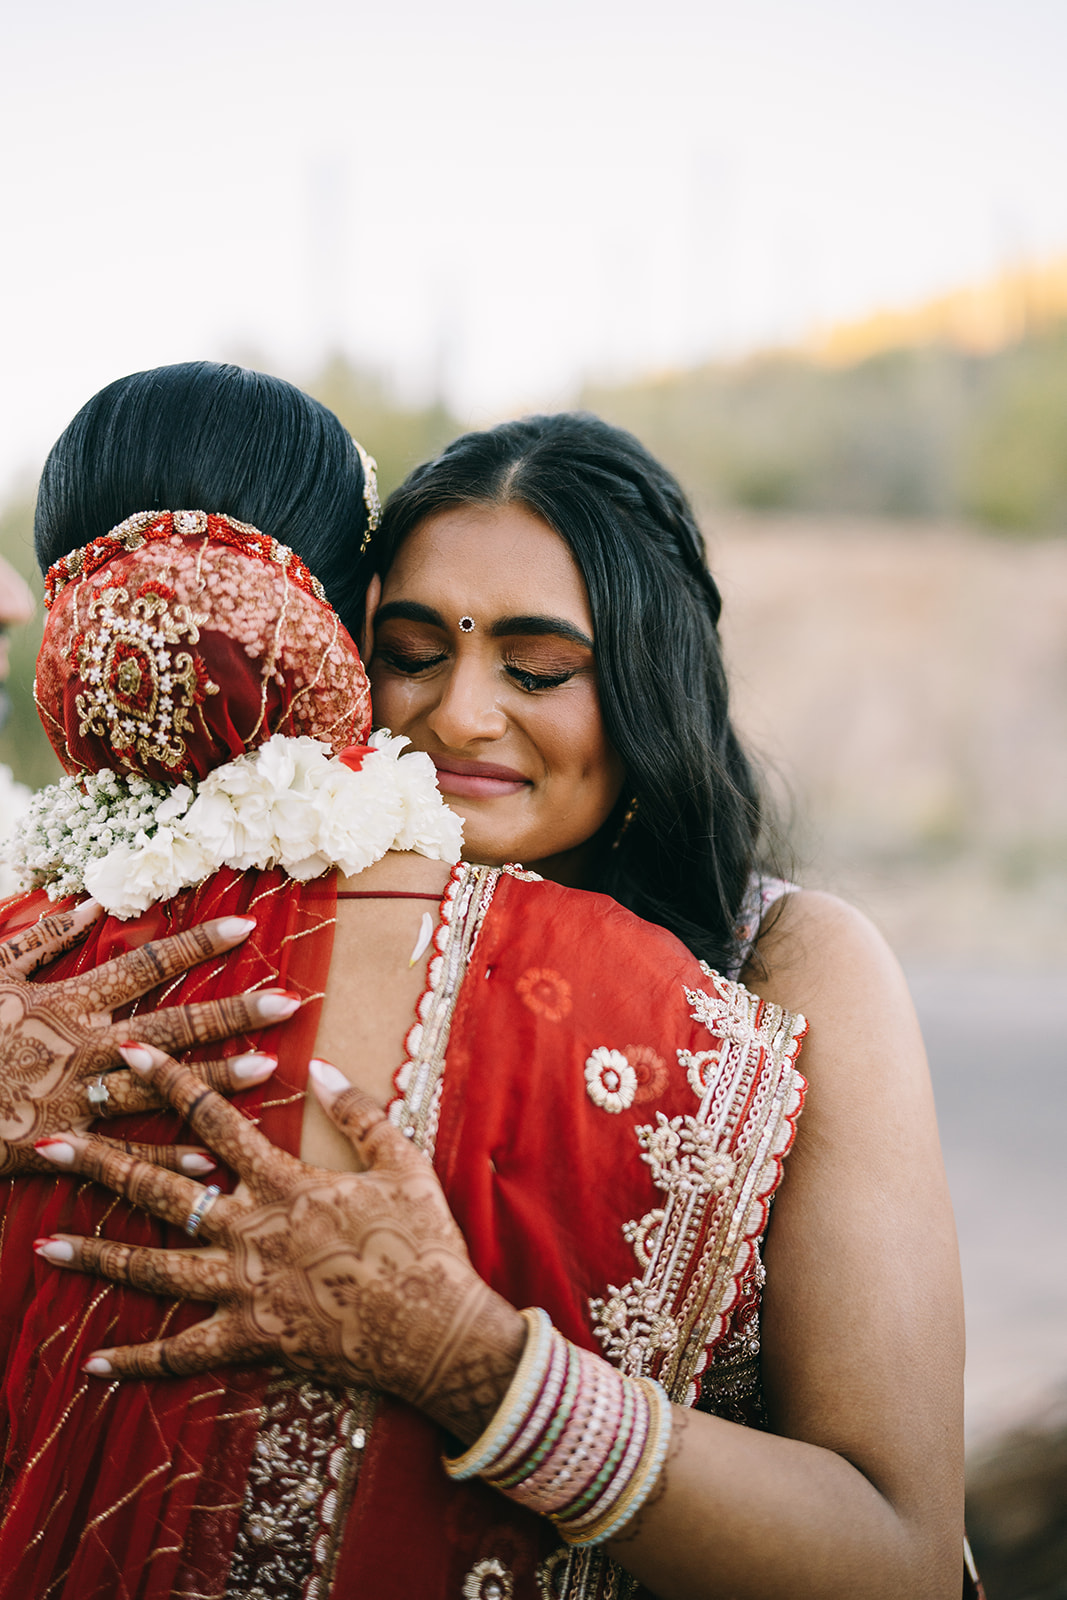 Young indian woman with henna and bangles on her arm embraces bride smiling